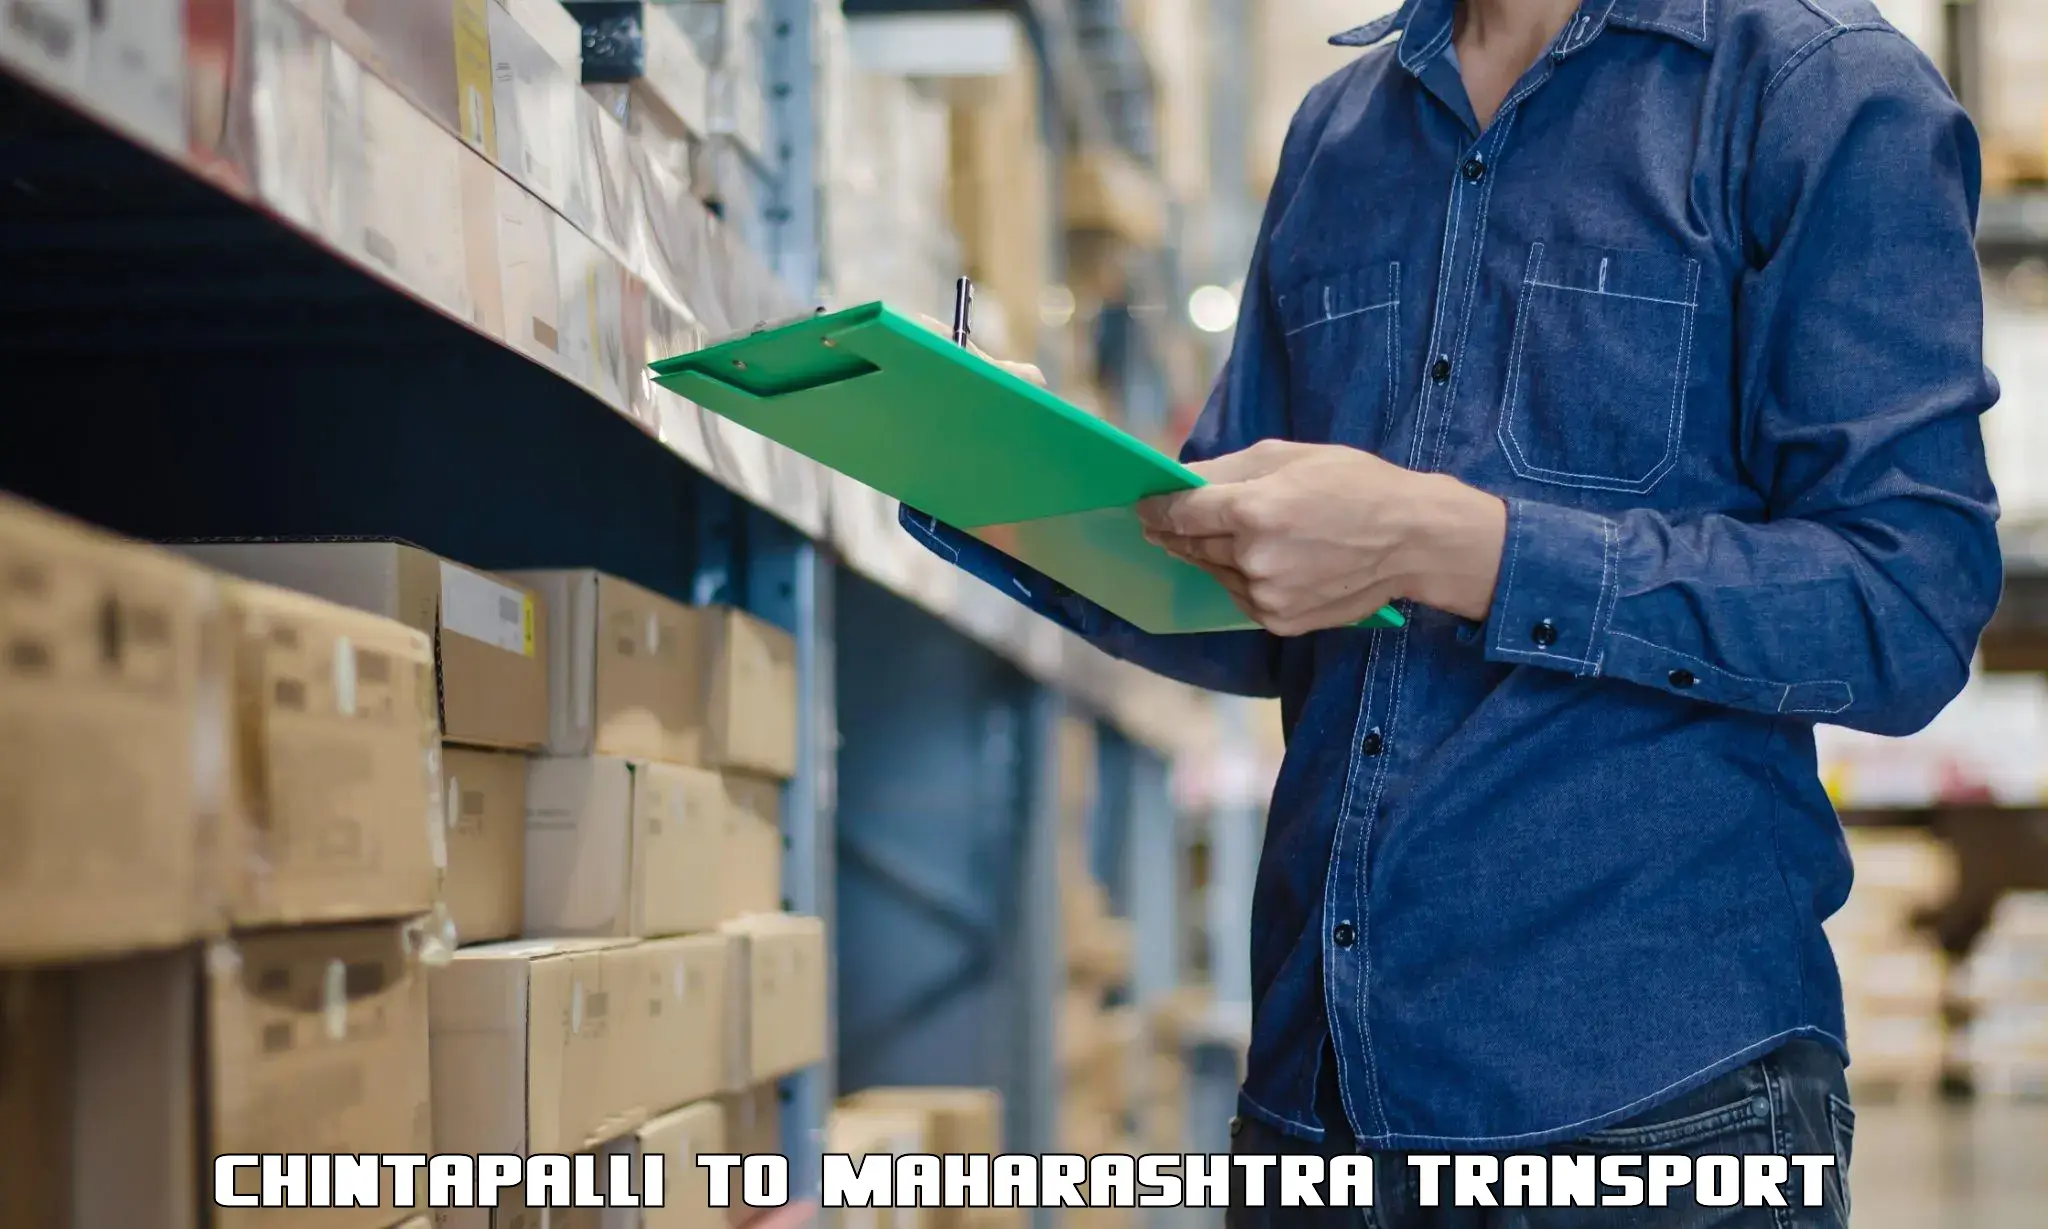 Air freight transport services Chintapalli to Mumbai